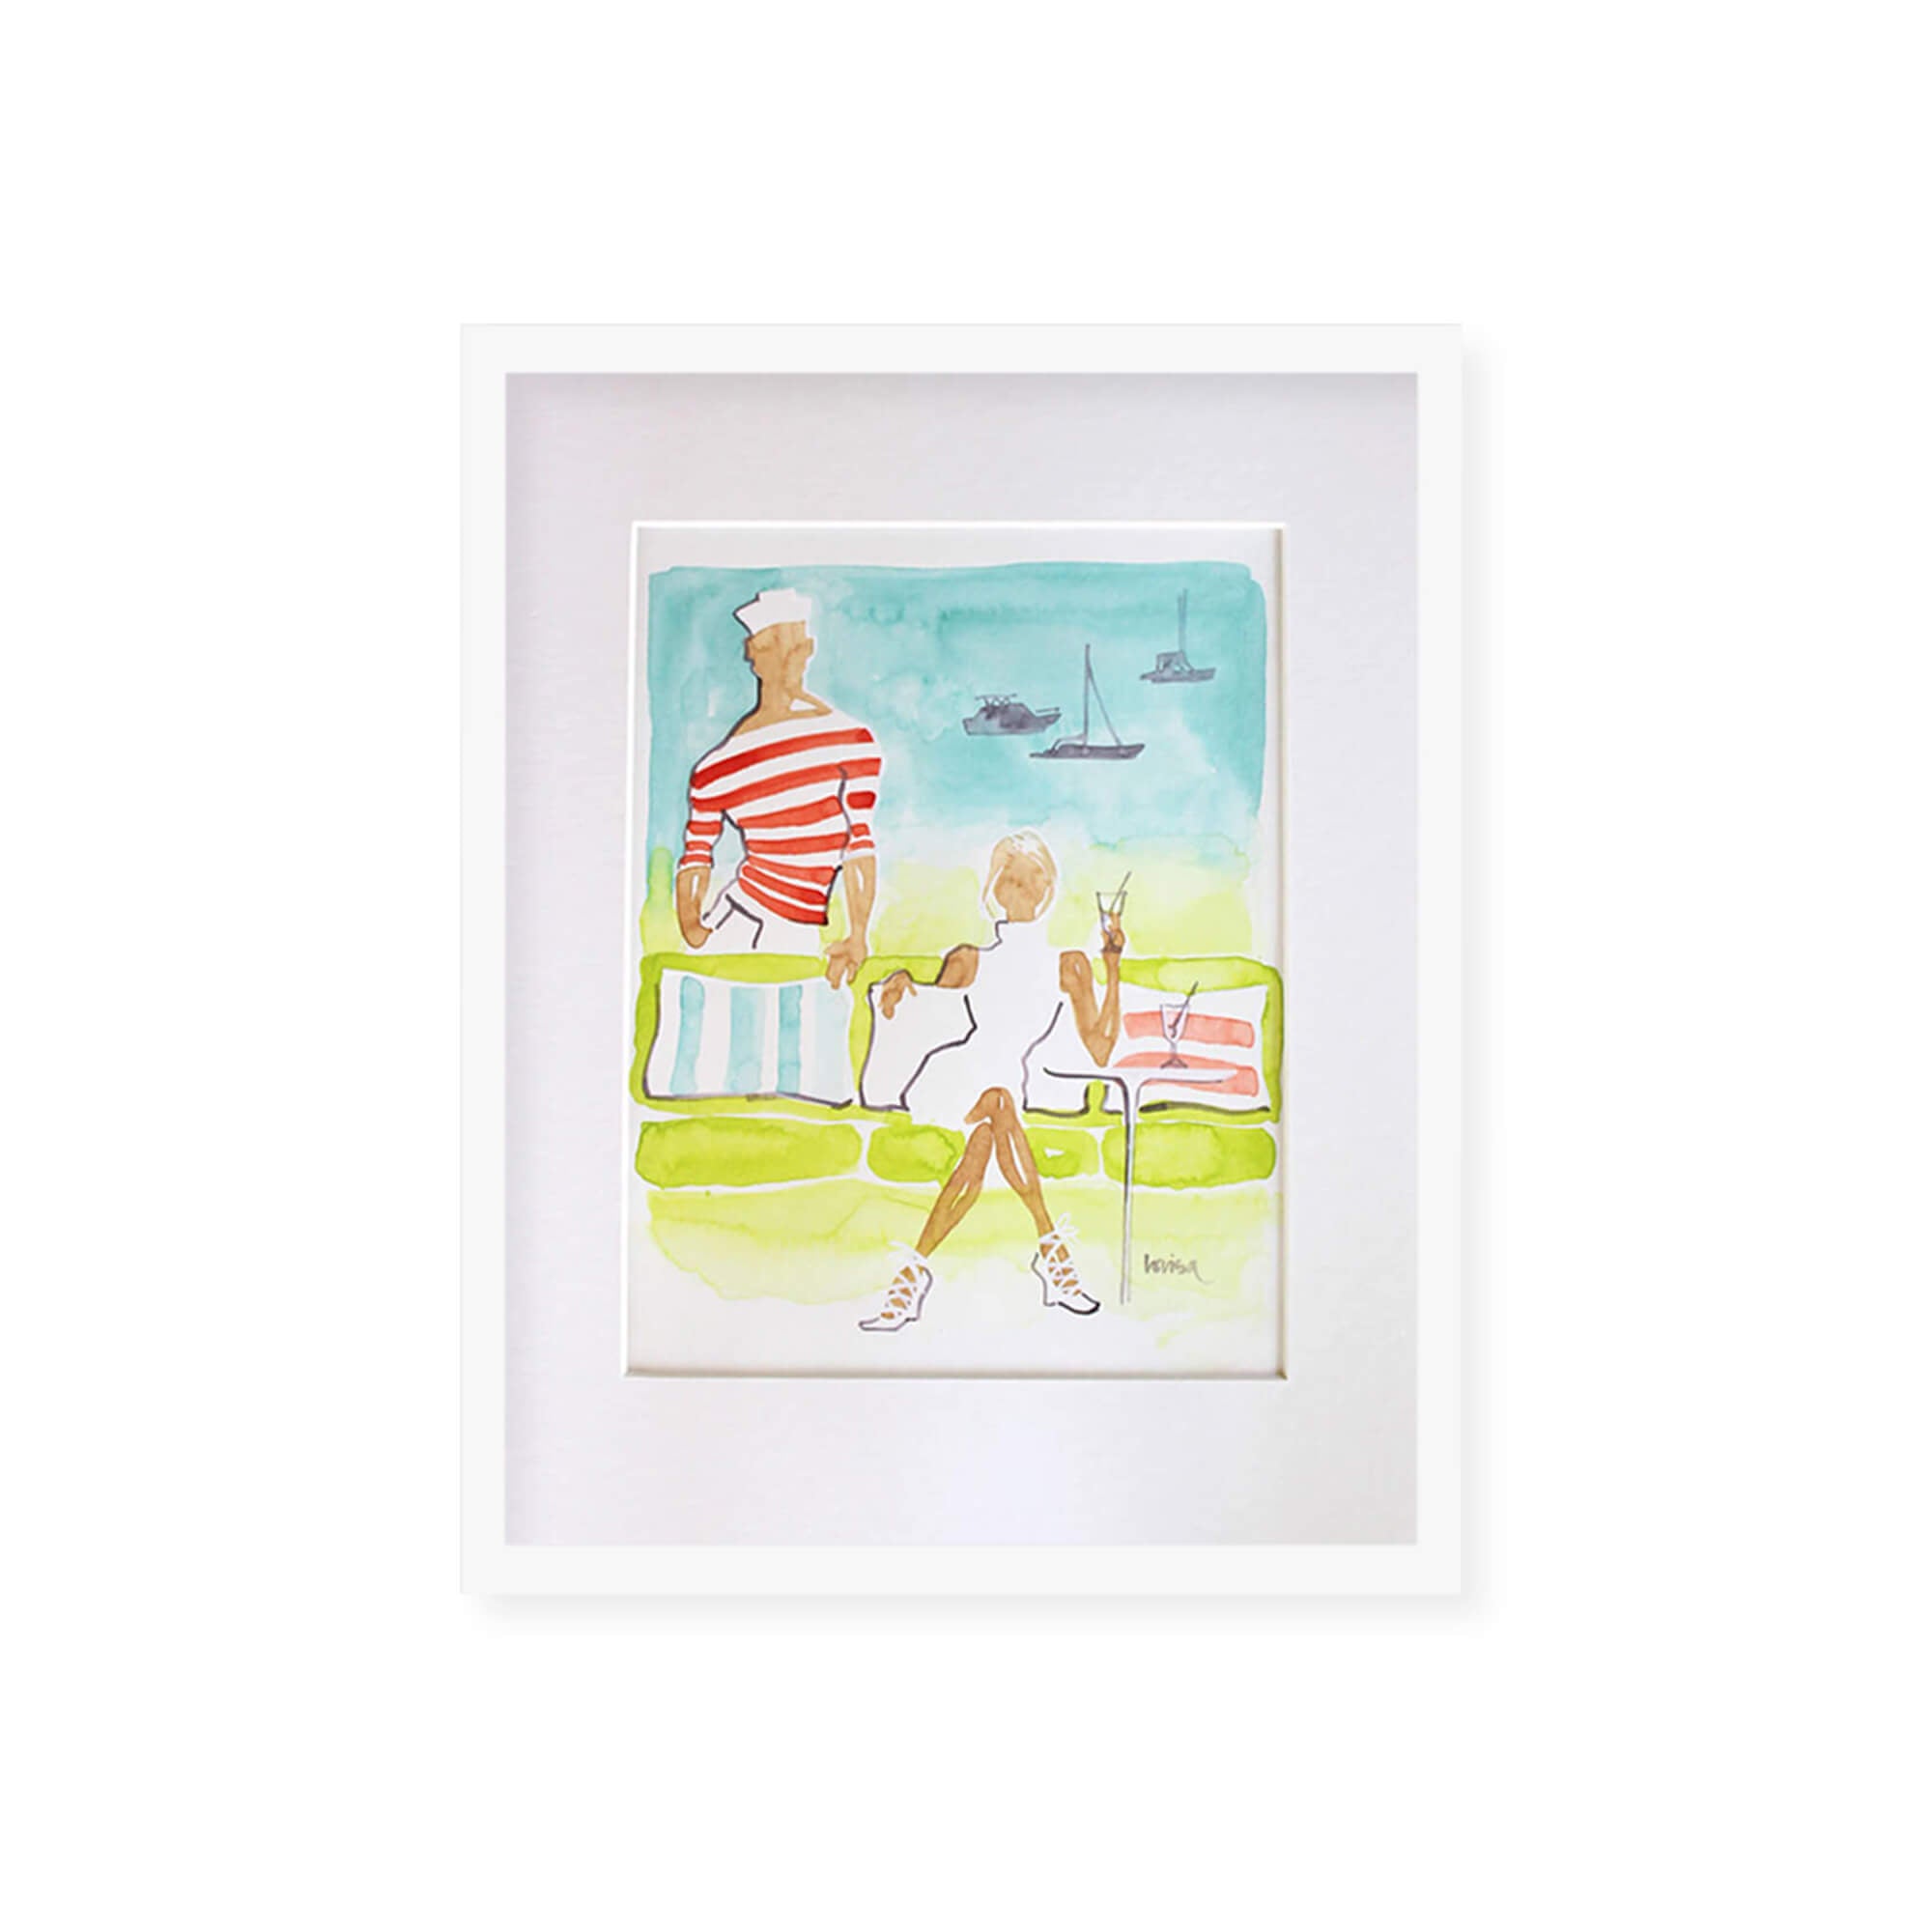 Framed original watercolor artwork featuring a fashionable woman drinking on a yacht by Hawaii artist Lovisa Oliv